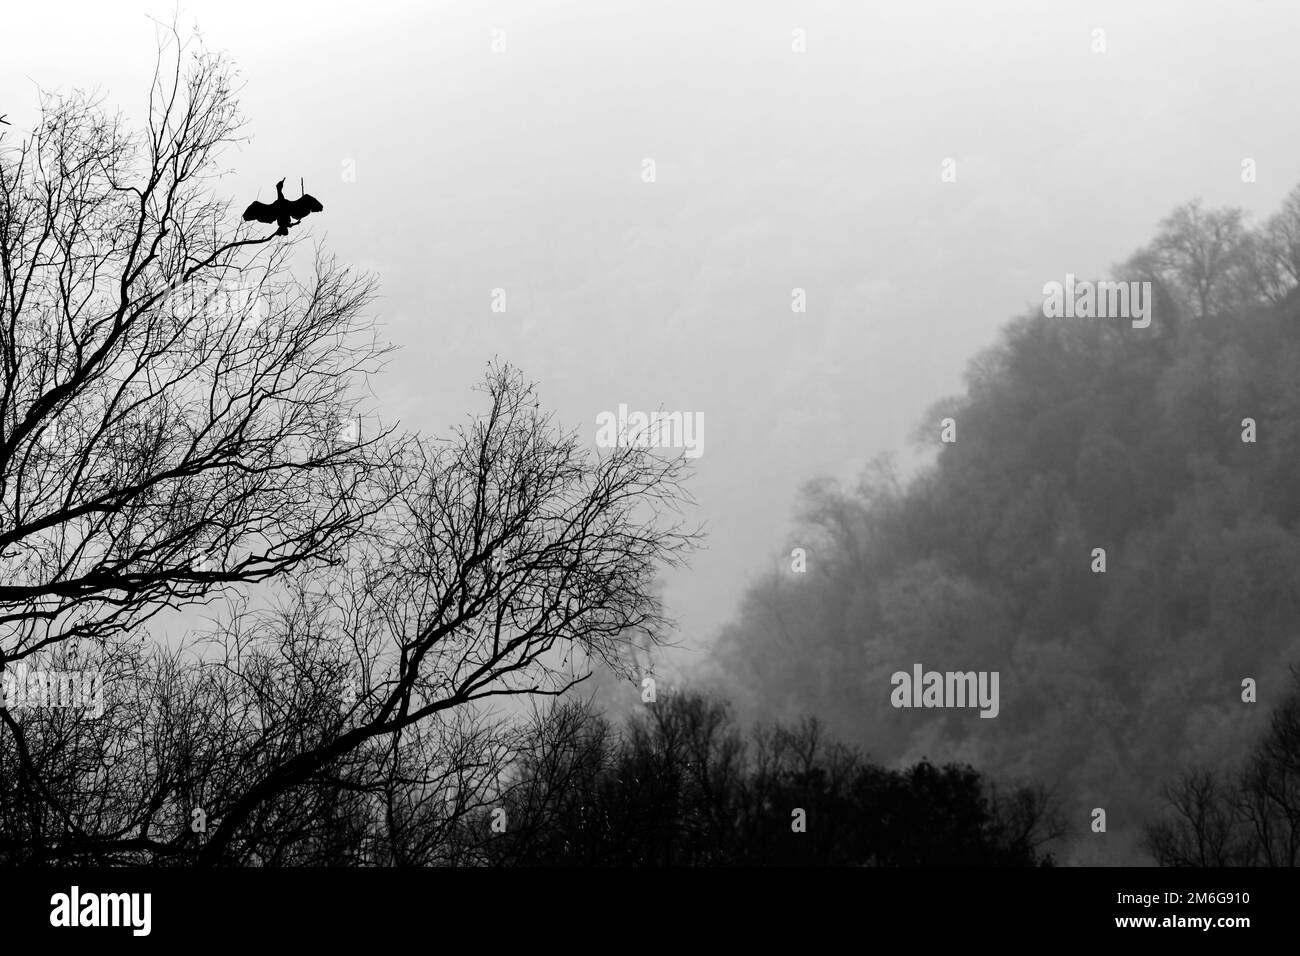 Cormorant on a tree with wings open to the sun on a foggy day Stock Photo